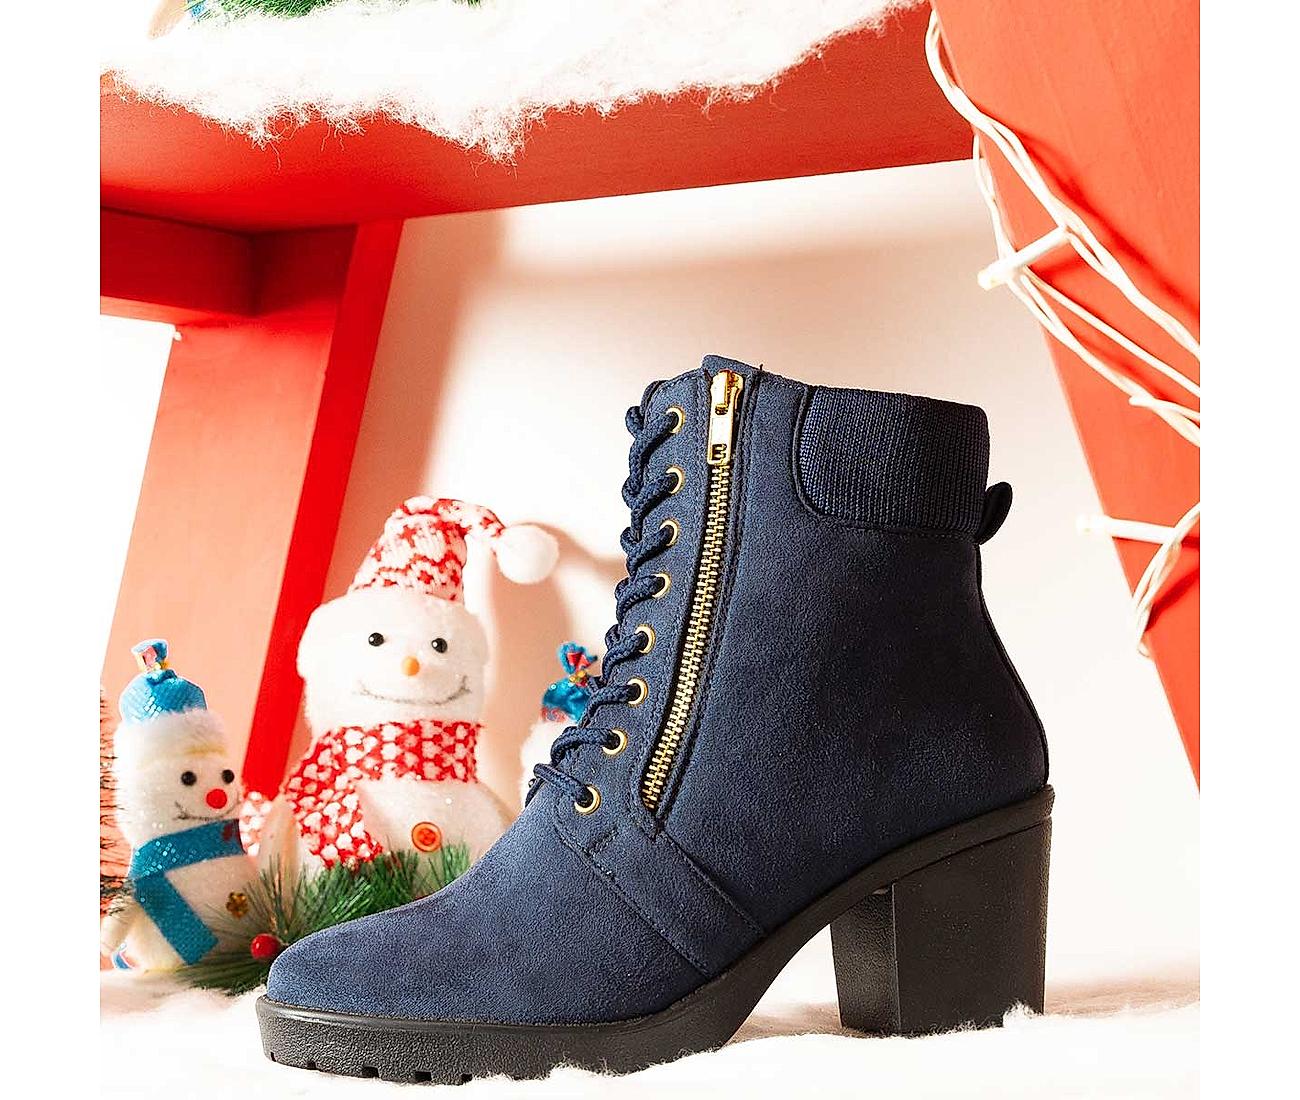 Lace Up Boots | Buy Women Lace Up boots online in New Zealand | Novo Shoes